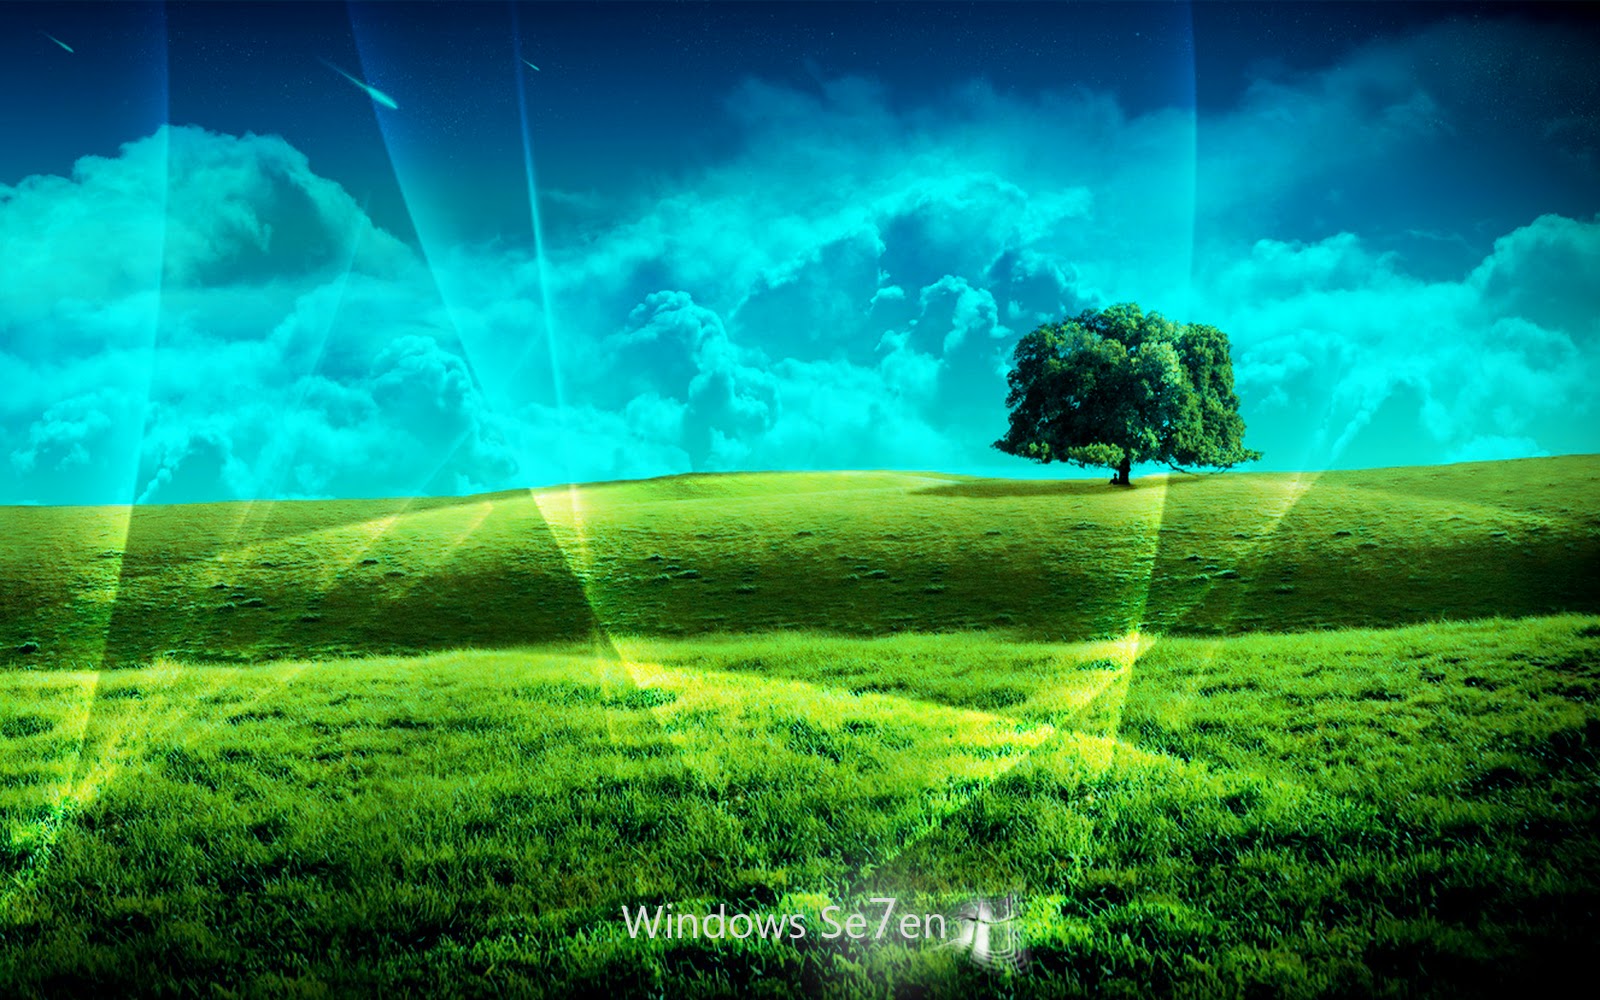 Windows Natural Desktop Best Quality Wallpaper Here You Can See